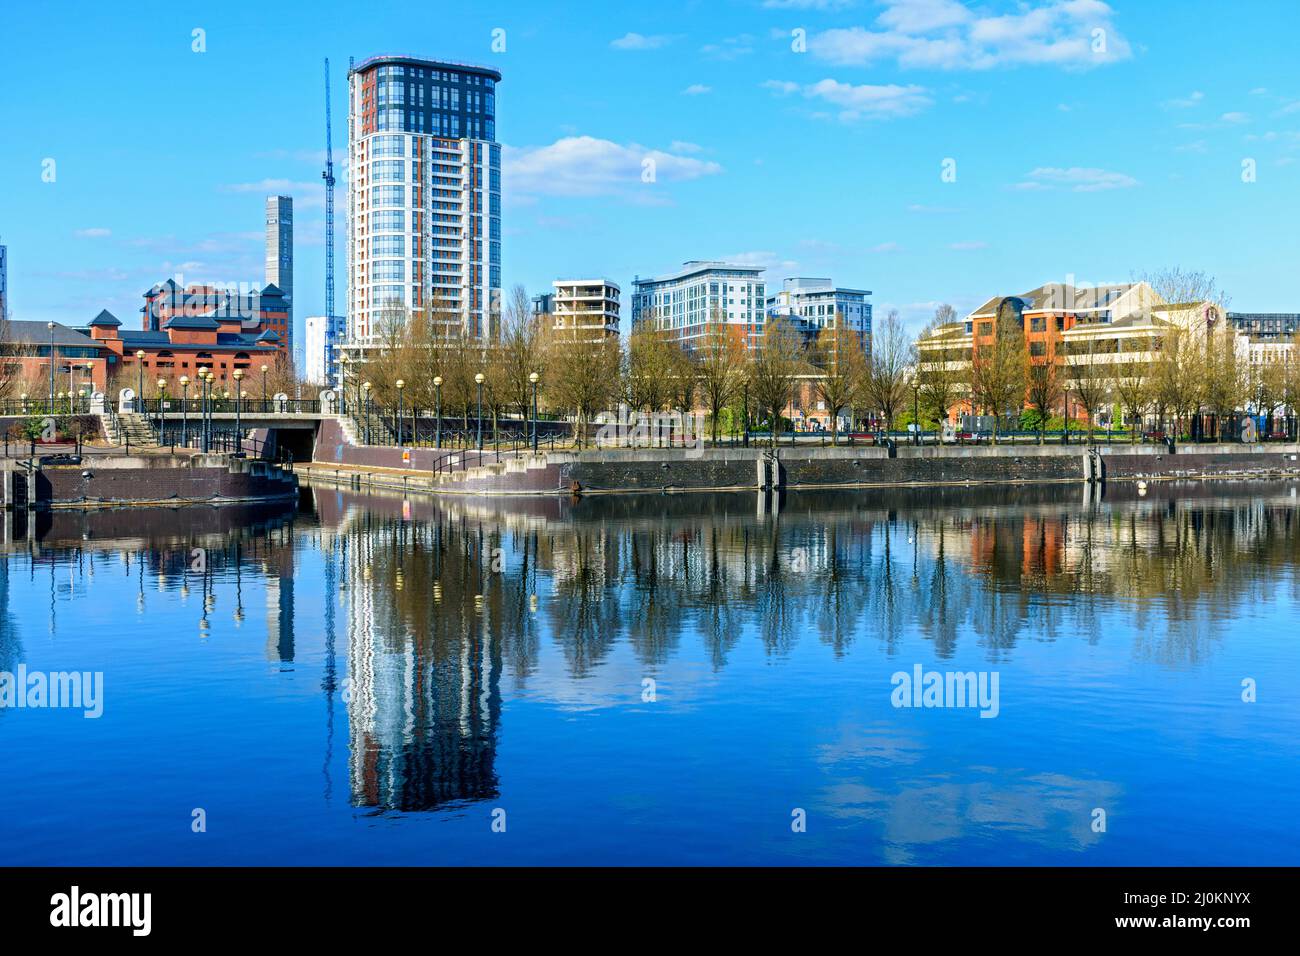 The Fortis Quay (Northill Apartments) block, over Salford Quays. Salford, Manchester, England, UK Stock Photo